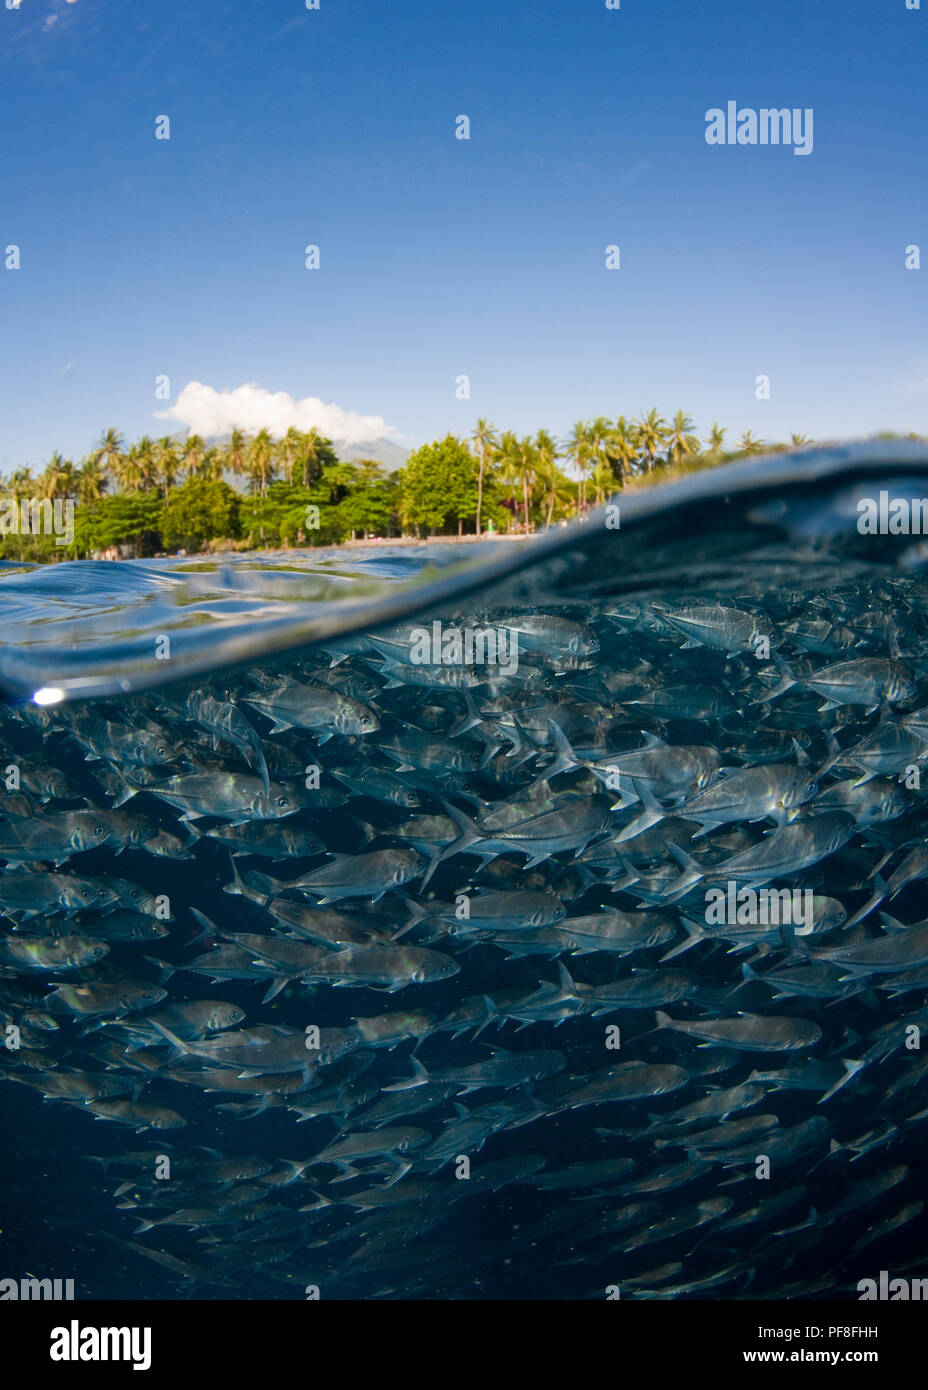 Split-level photo of a school of big-eye trevally underwater, with the shore, palm trees, and blue sky above water. Tulamben, Bali, Indonesia. Stock Photo